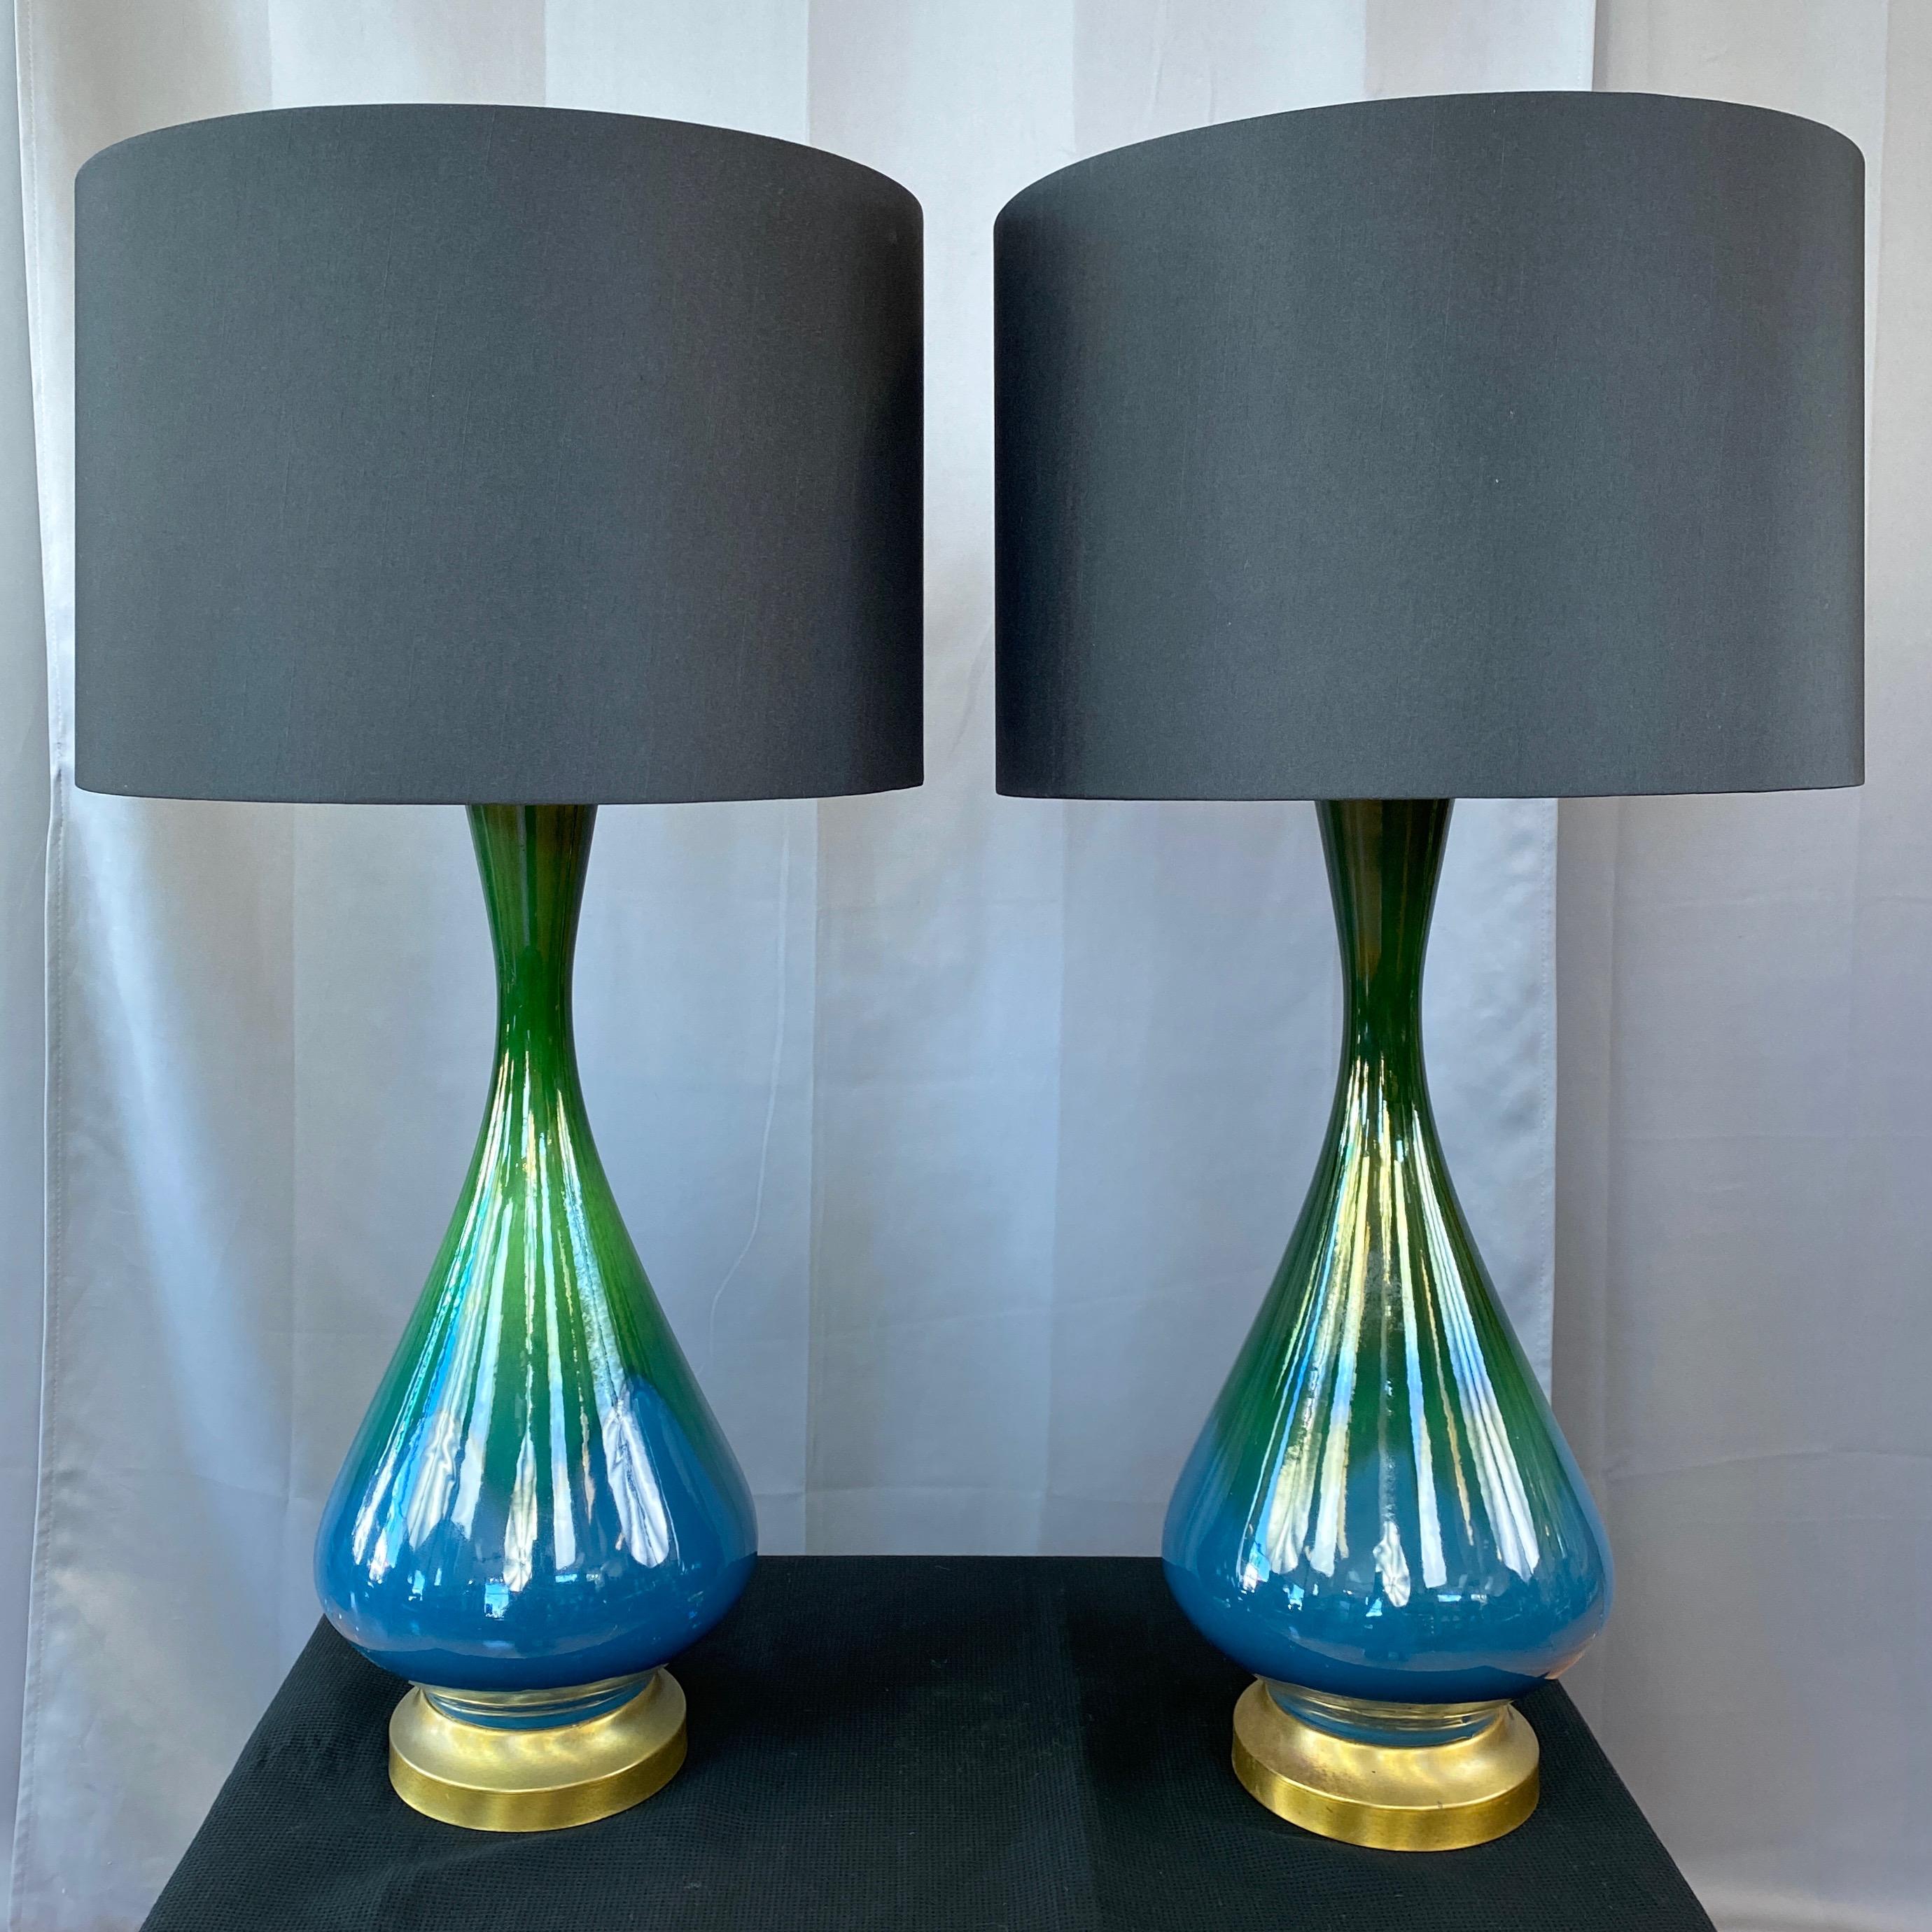 A lovely pair of 1950s blue-green ombré drip glaze ceramic and brass table lamps with black shades.

Perfectly proportioned mid-century modern teardrop body with glossy emerald green glaze transitioning to cerulean blue. On satin finish brass base